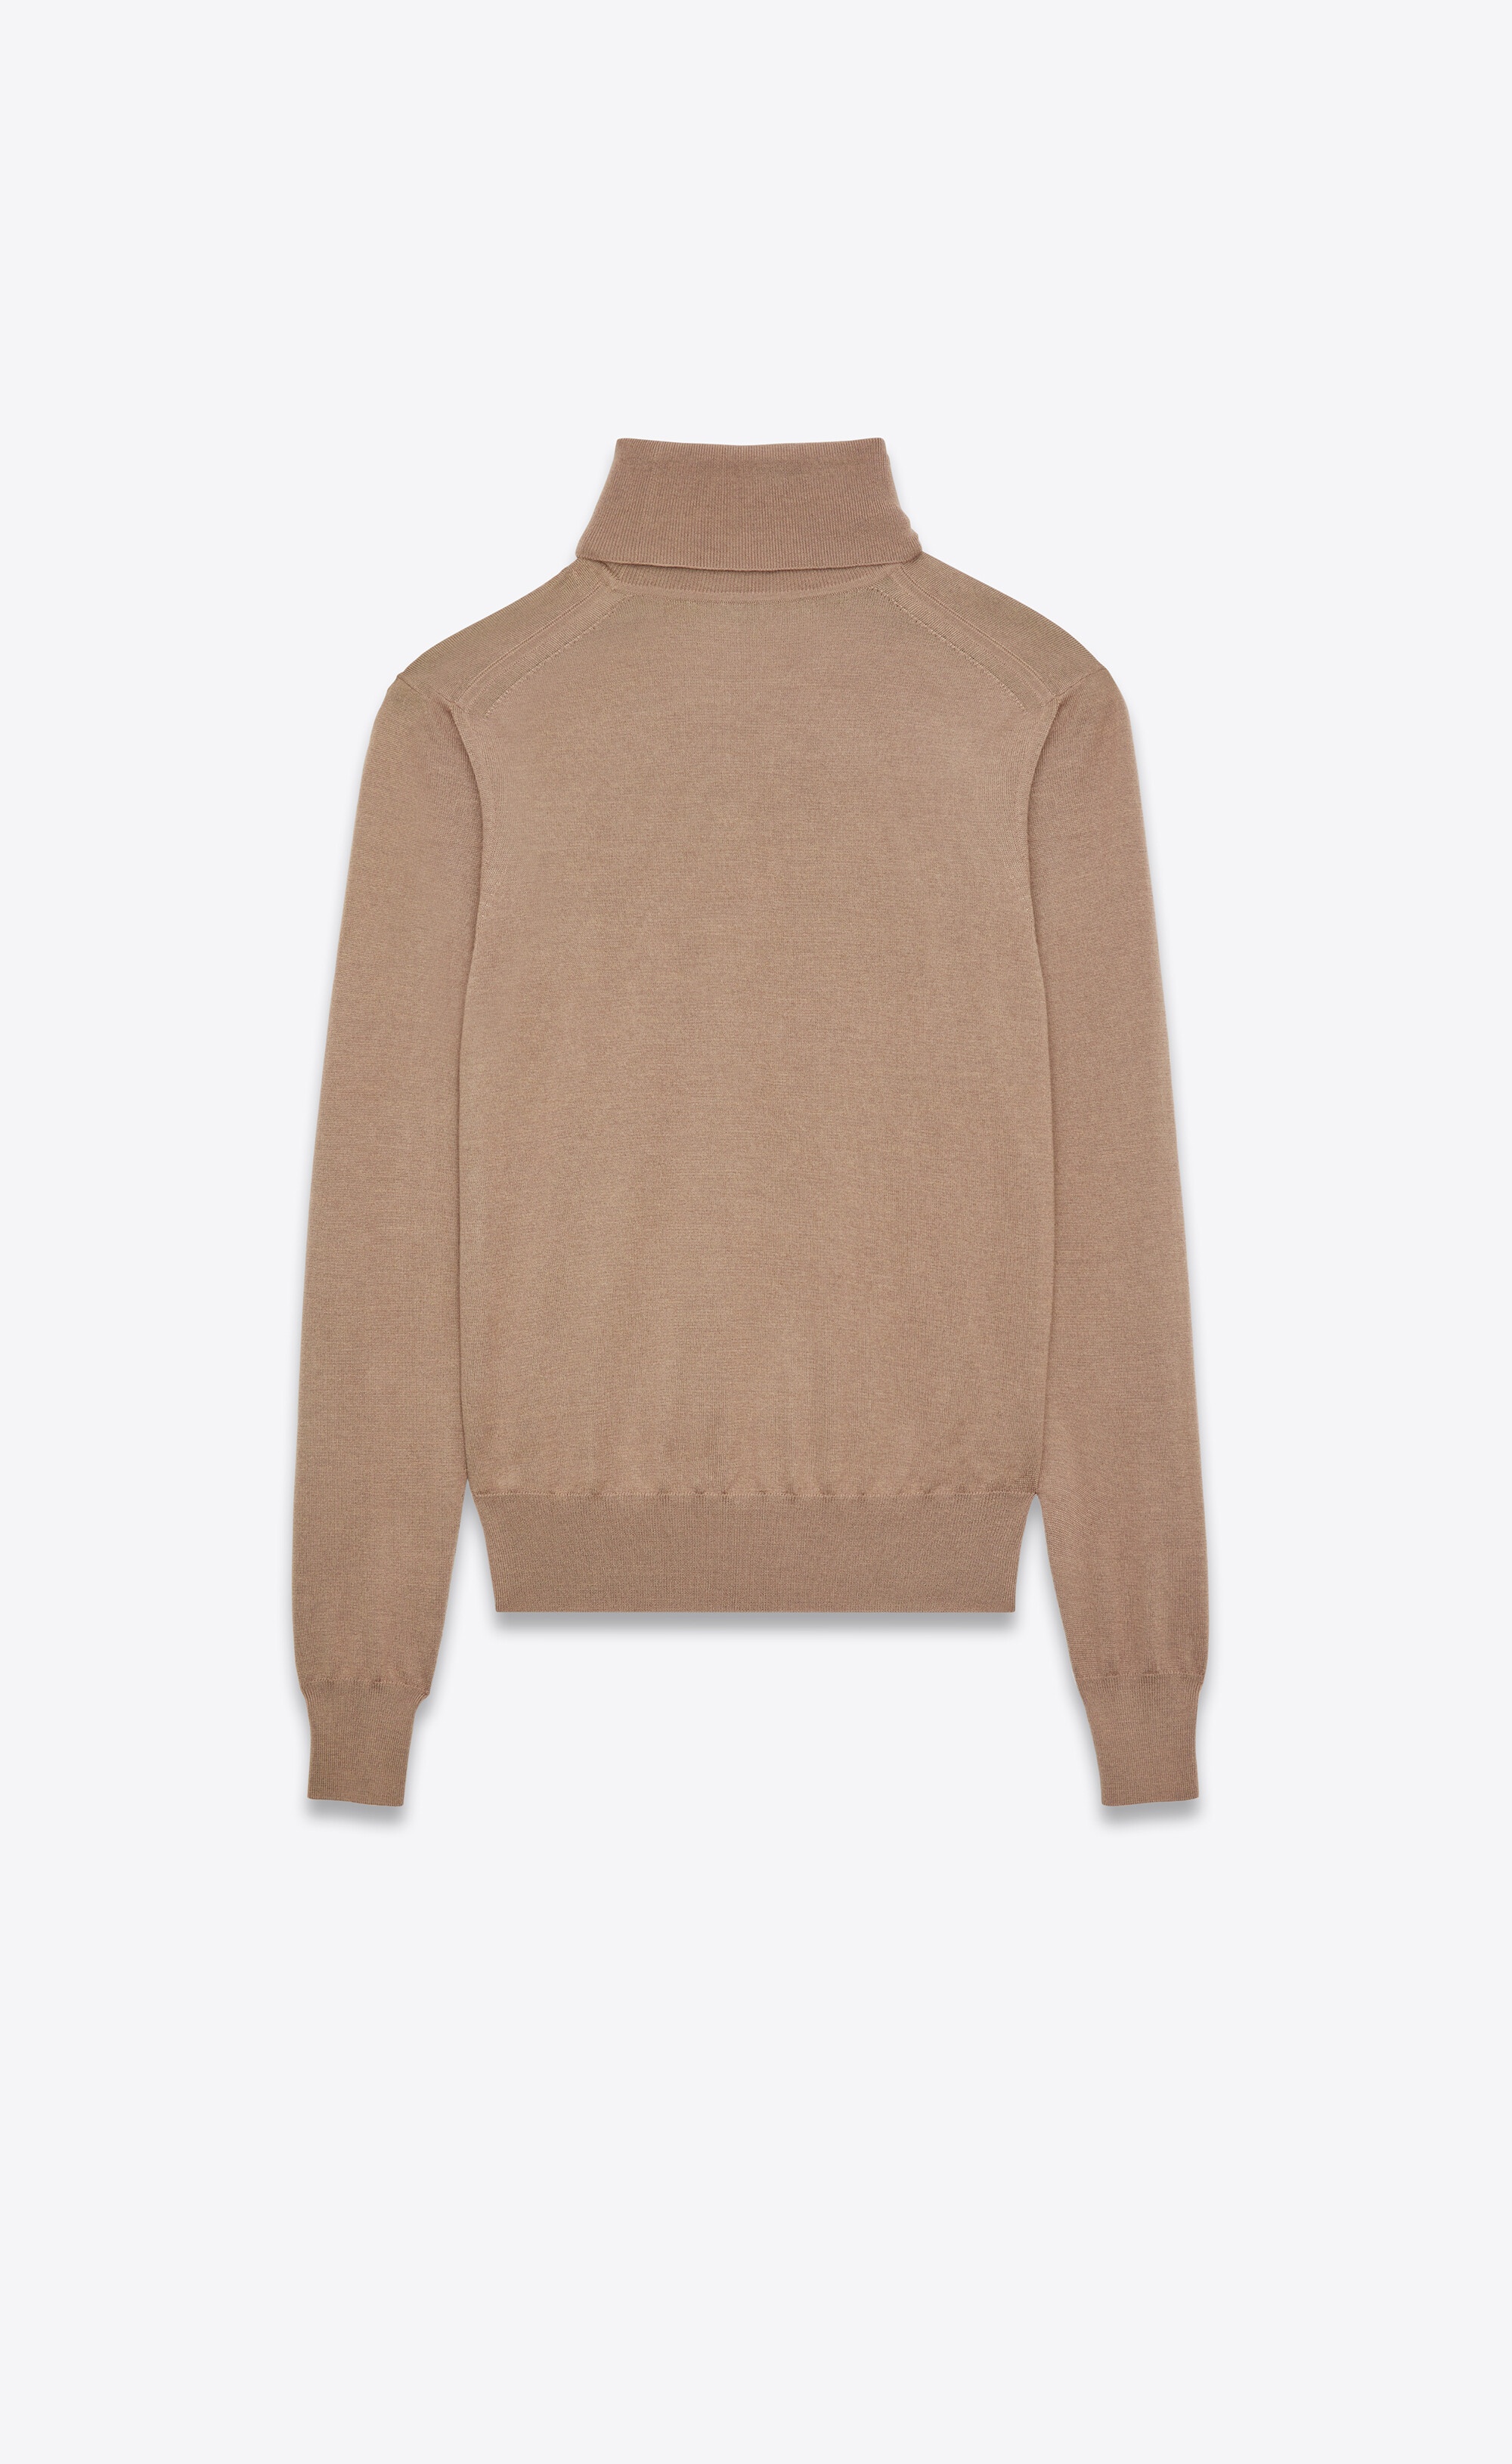 turtleneck sweater in cashmere, wool and silk - 2